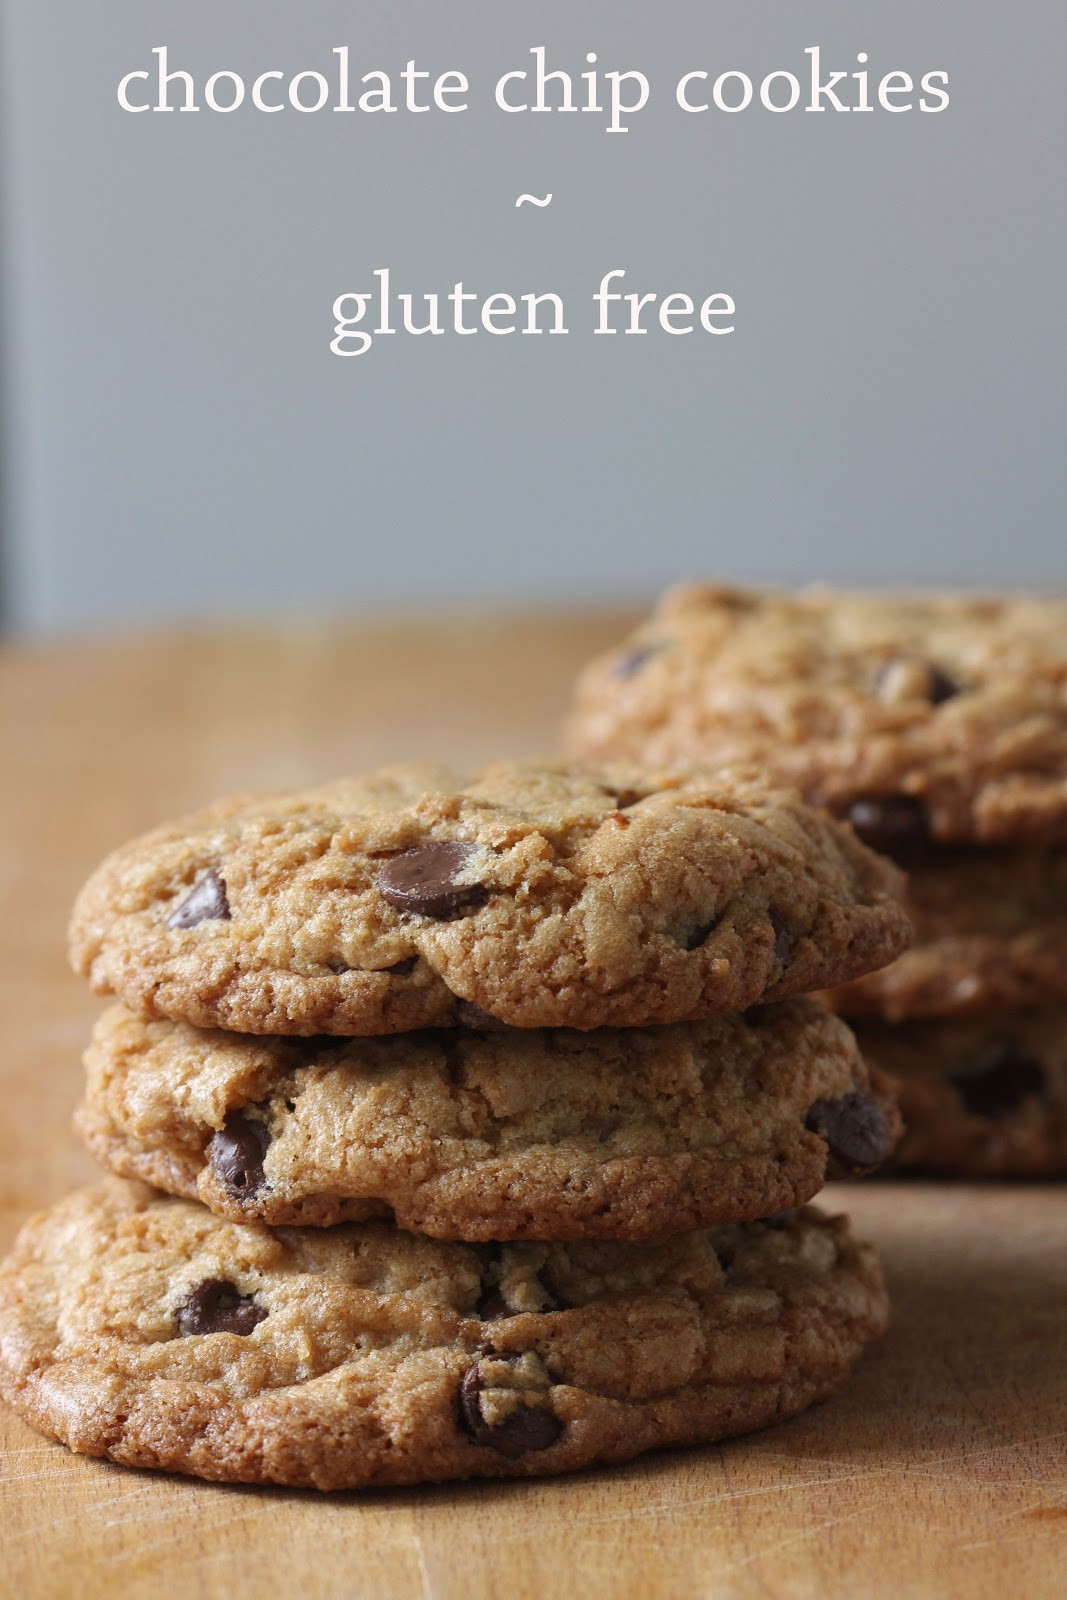 Gluten And Dairy Free Chocolate Chip Cookies Chocolate Chip Cookies Gluten Free